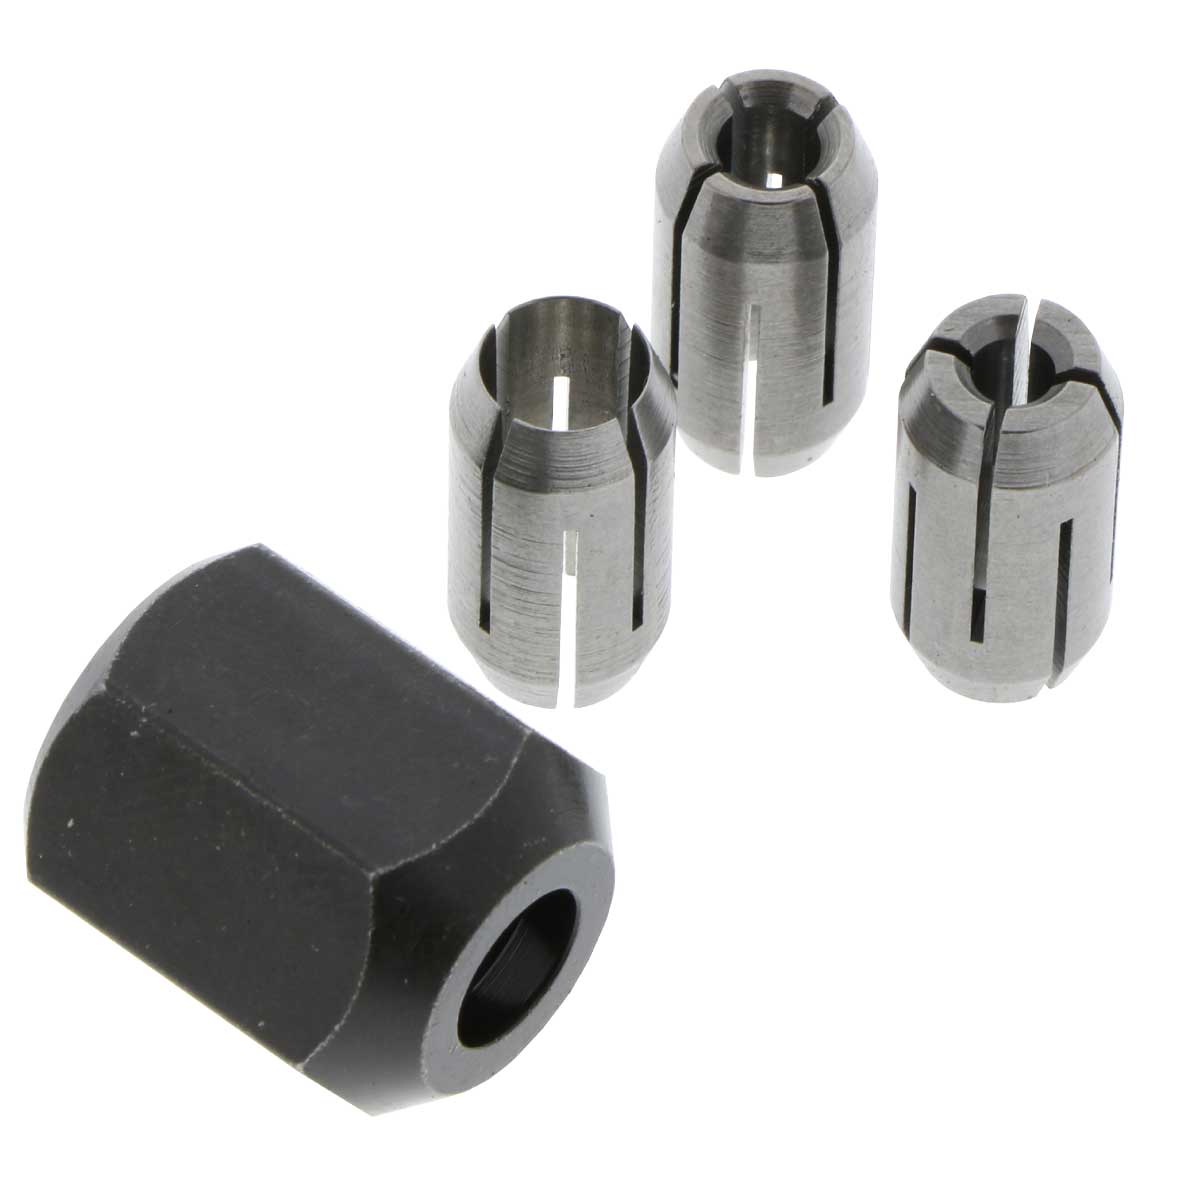 RotoZip CN1 Replacement Collet and Nut Kit